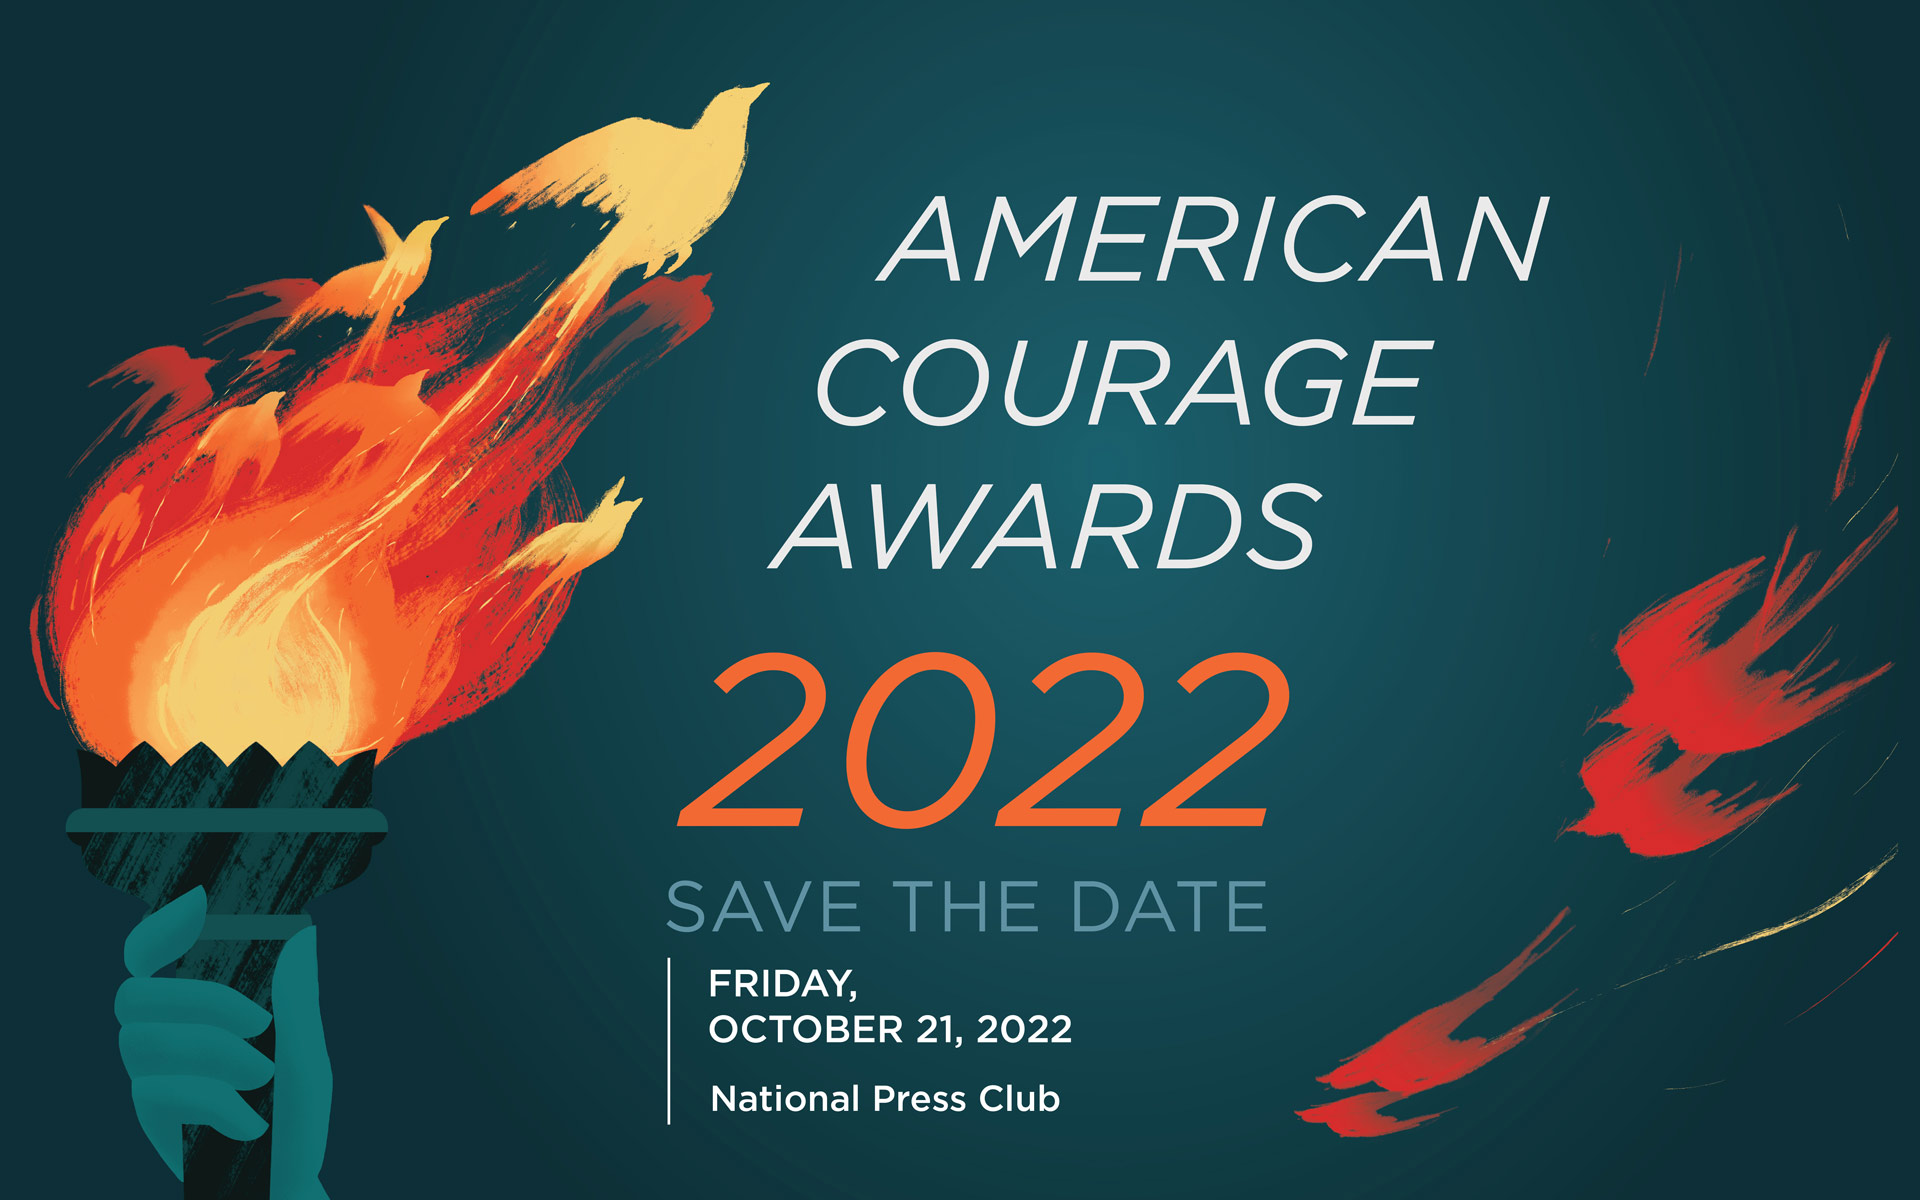 2022 American Courage Awards Graphic. A green background and a hand holding a torch with burning flames. Flames in the shape or birds are flying out of flames and circling in the background.